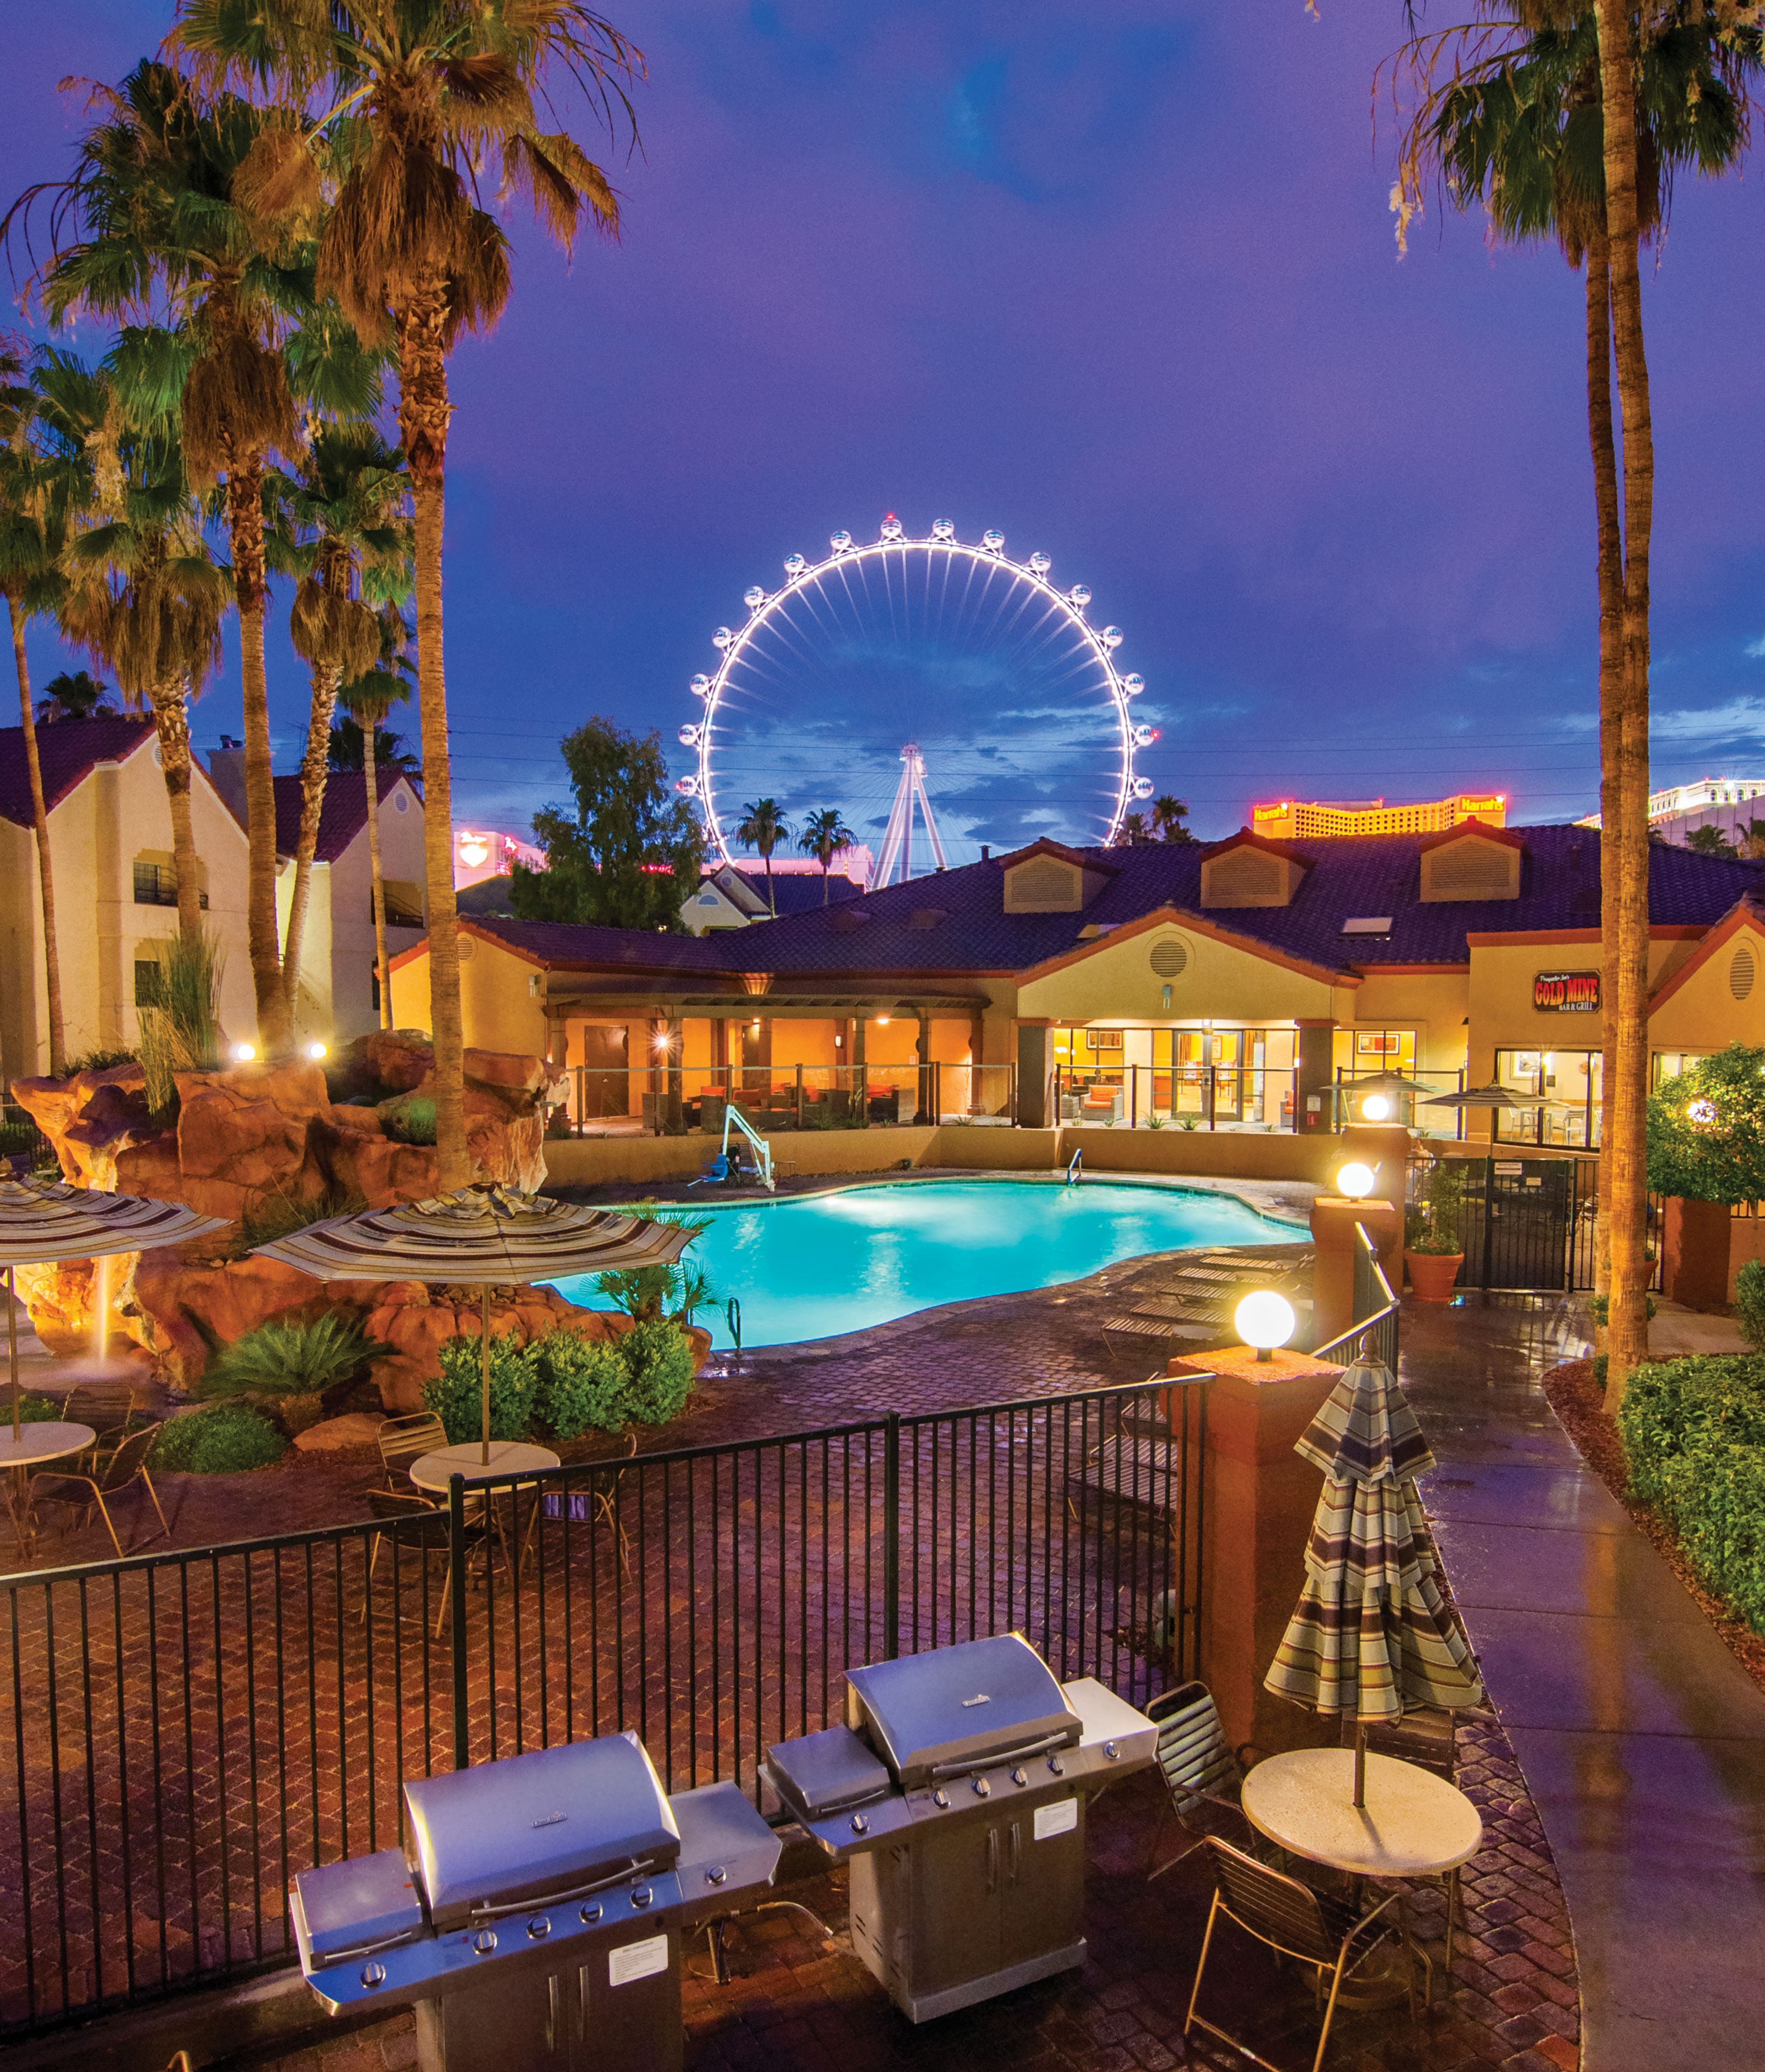 25 Best Las Vegas Hotels On The Strip - Best Hotels Anywhere